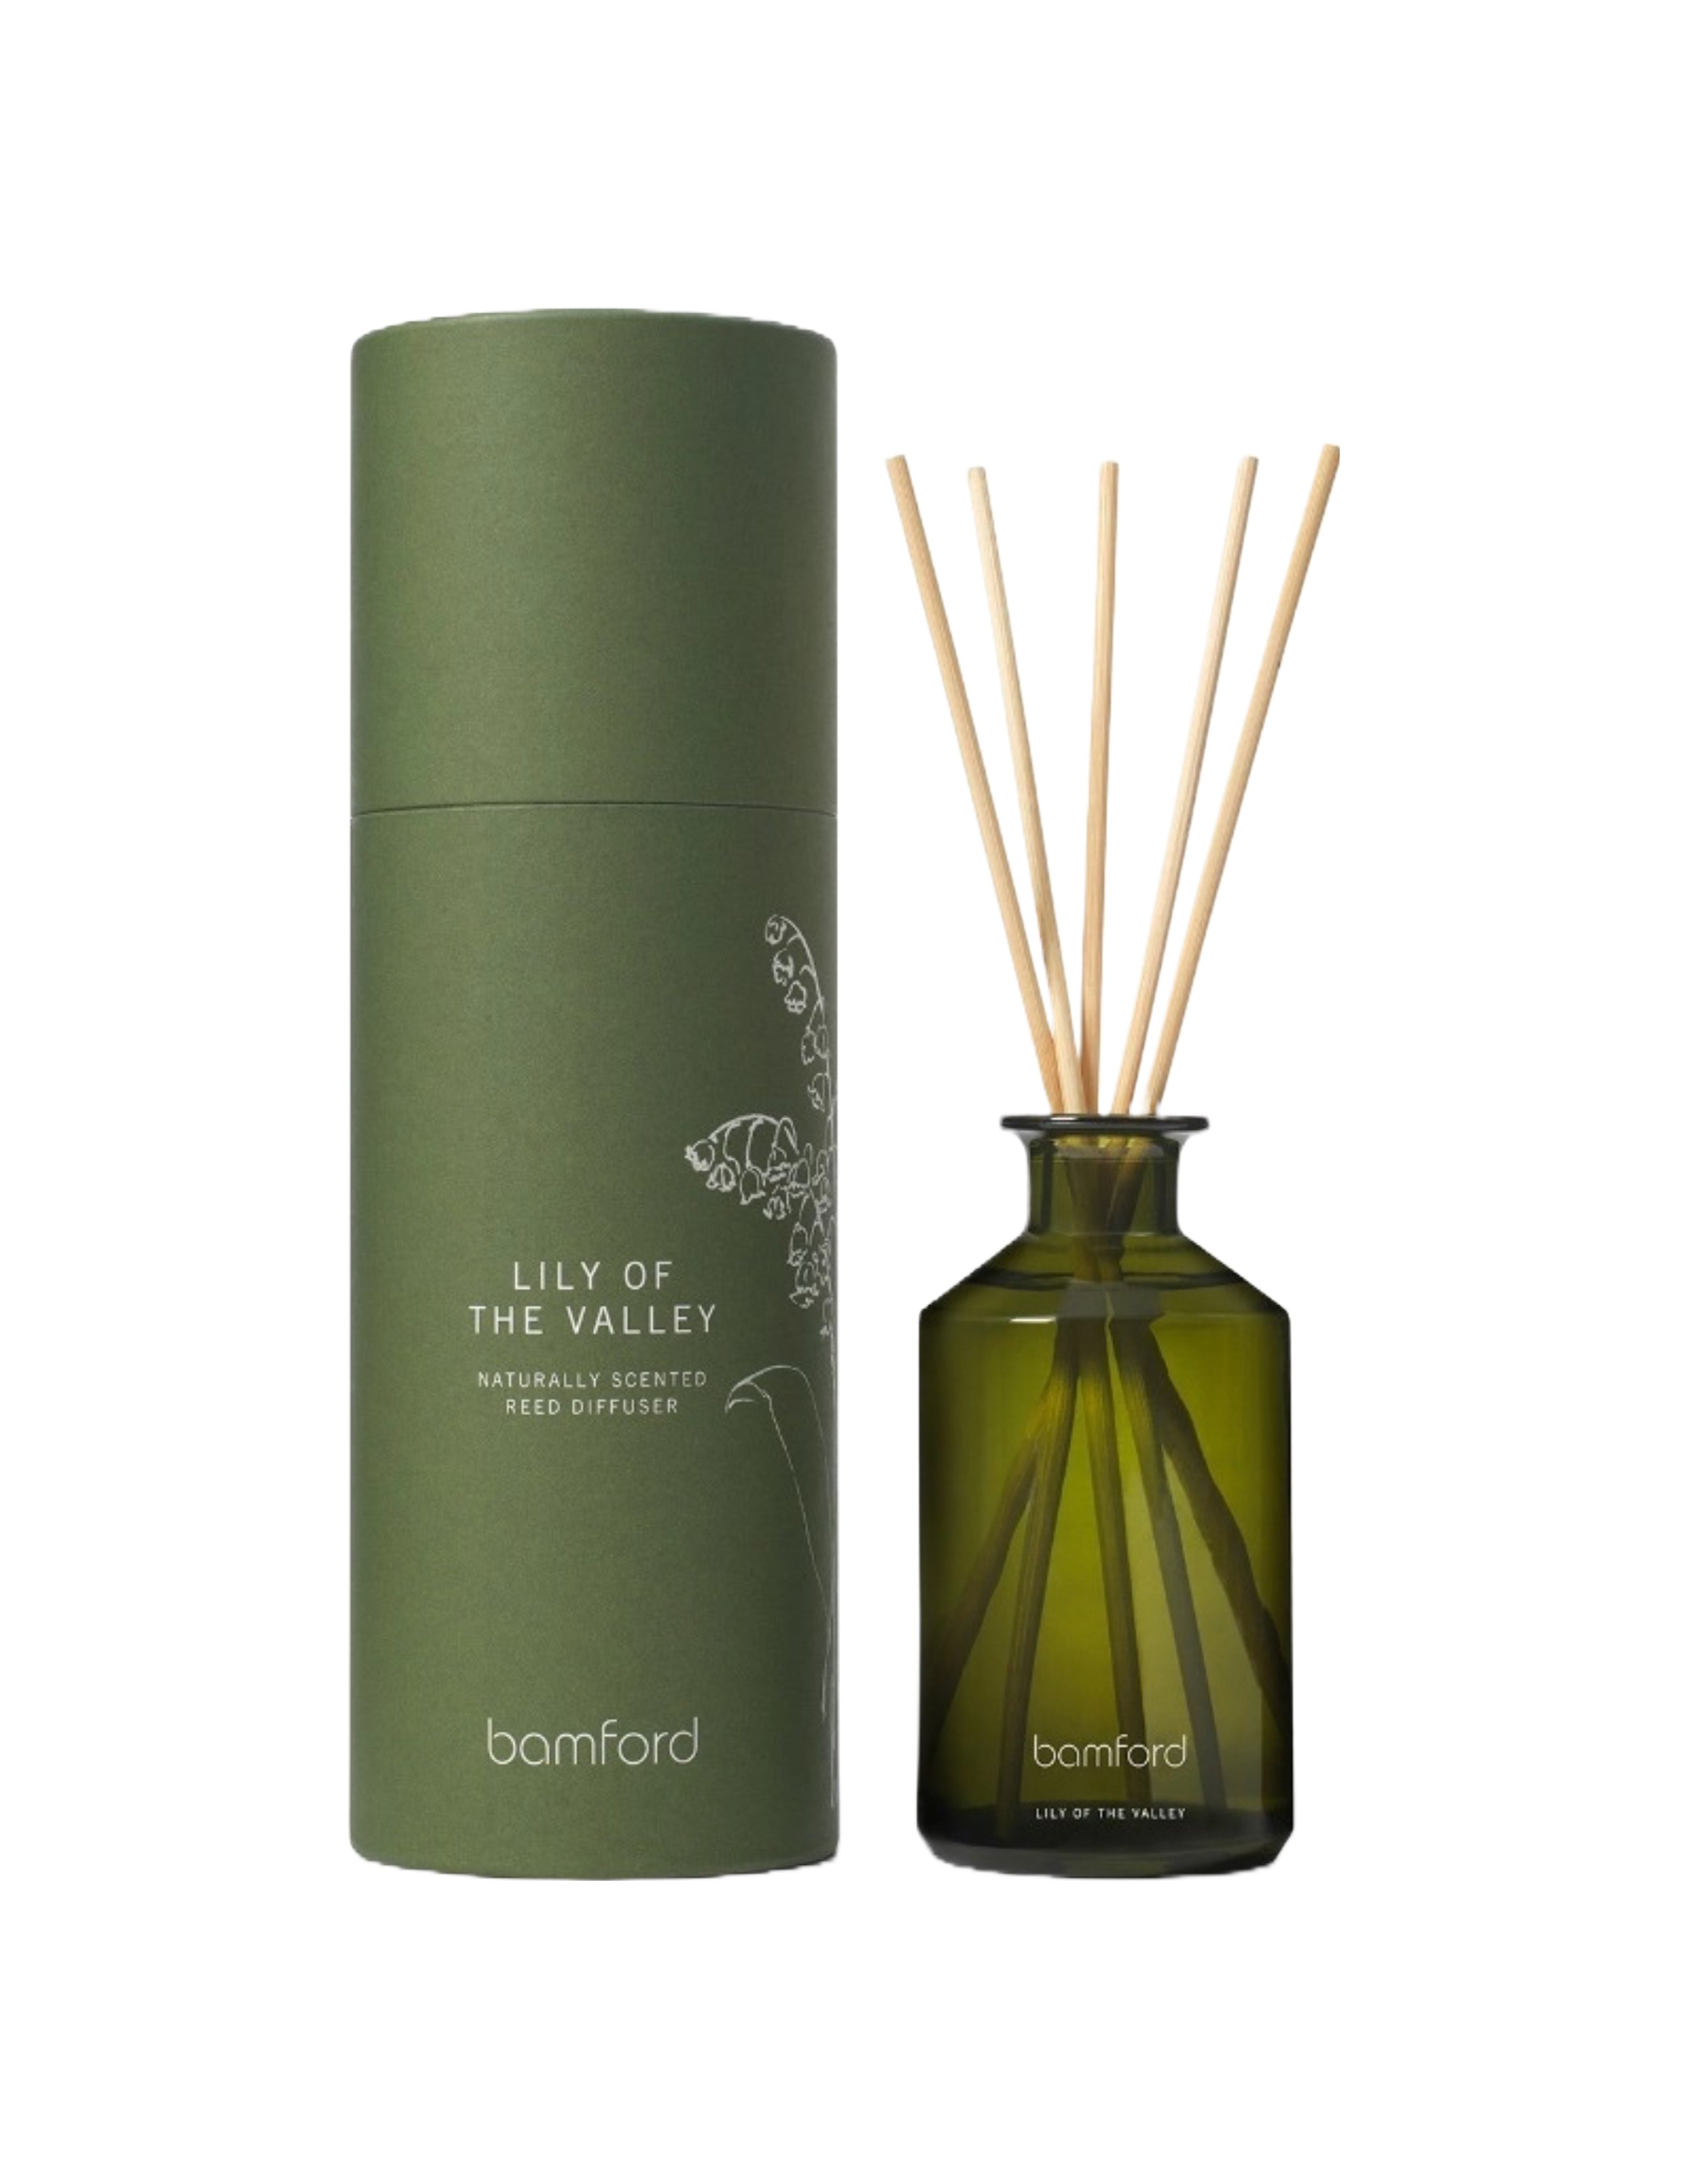 Garden Diffuser Set - Lily of the Valley